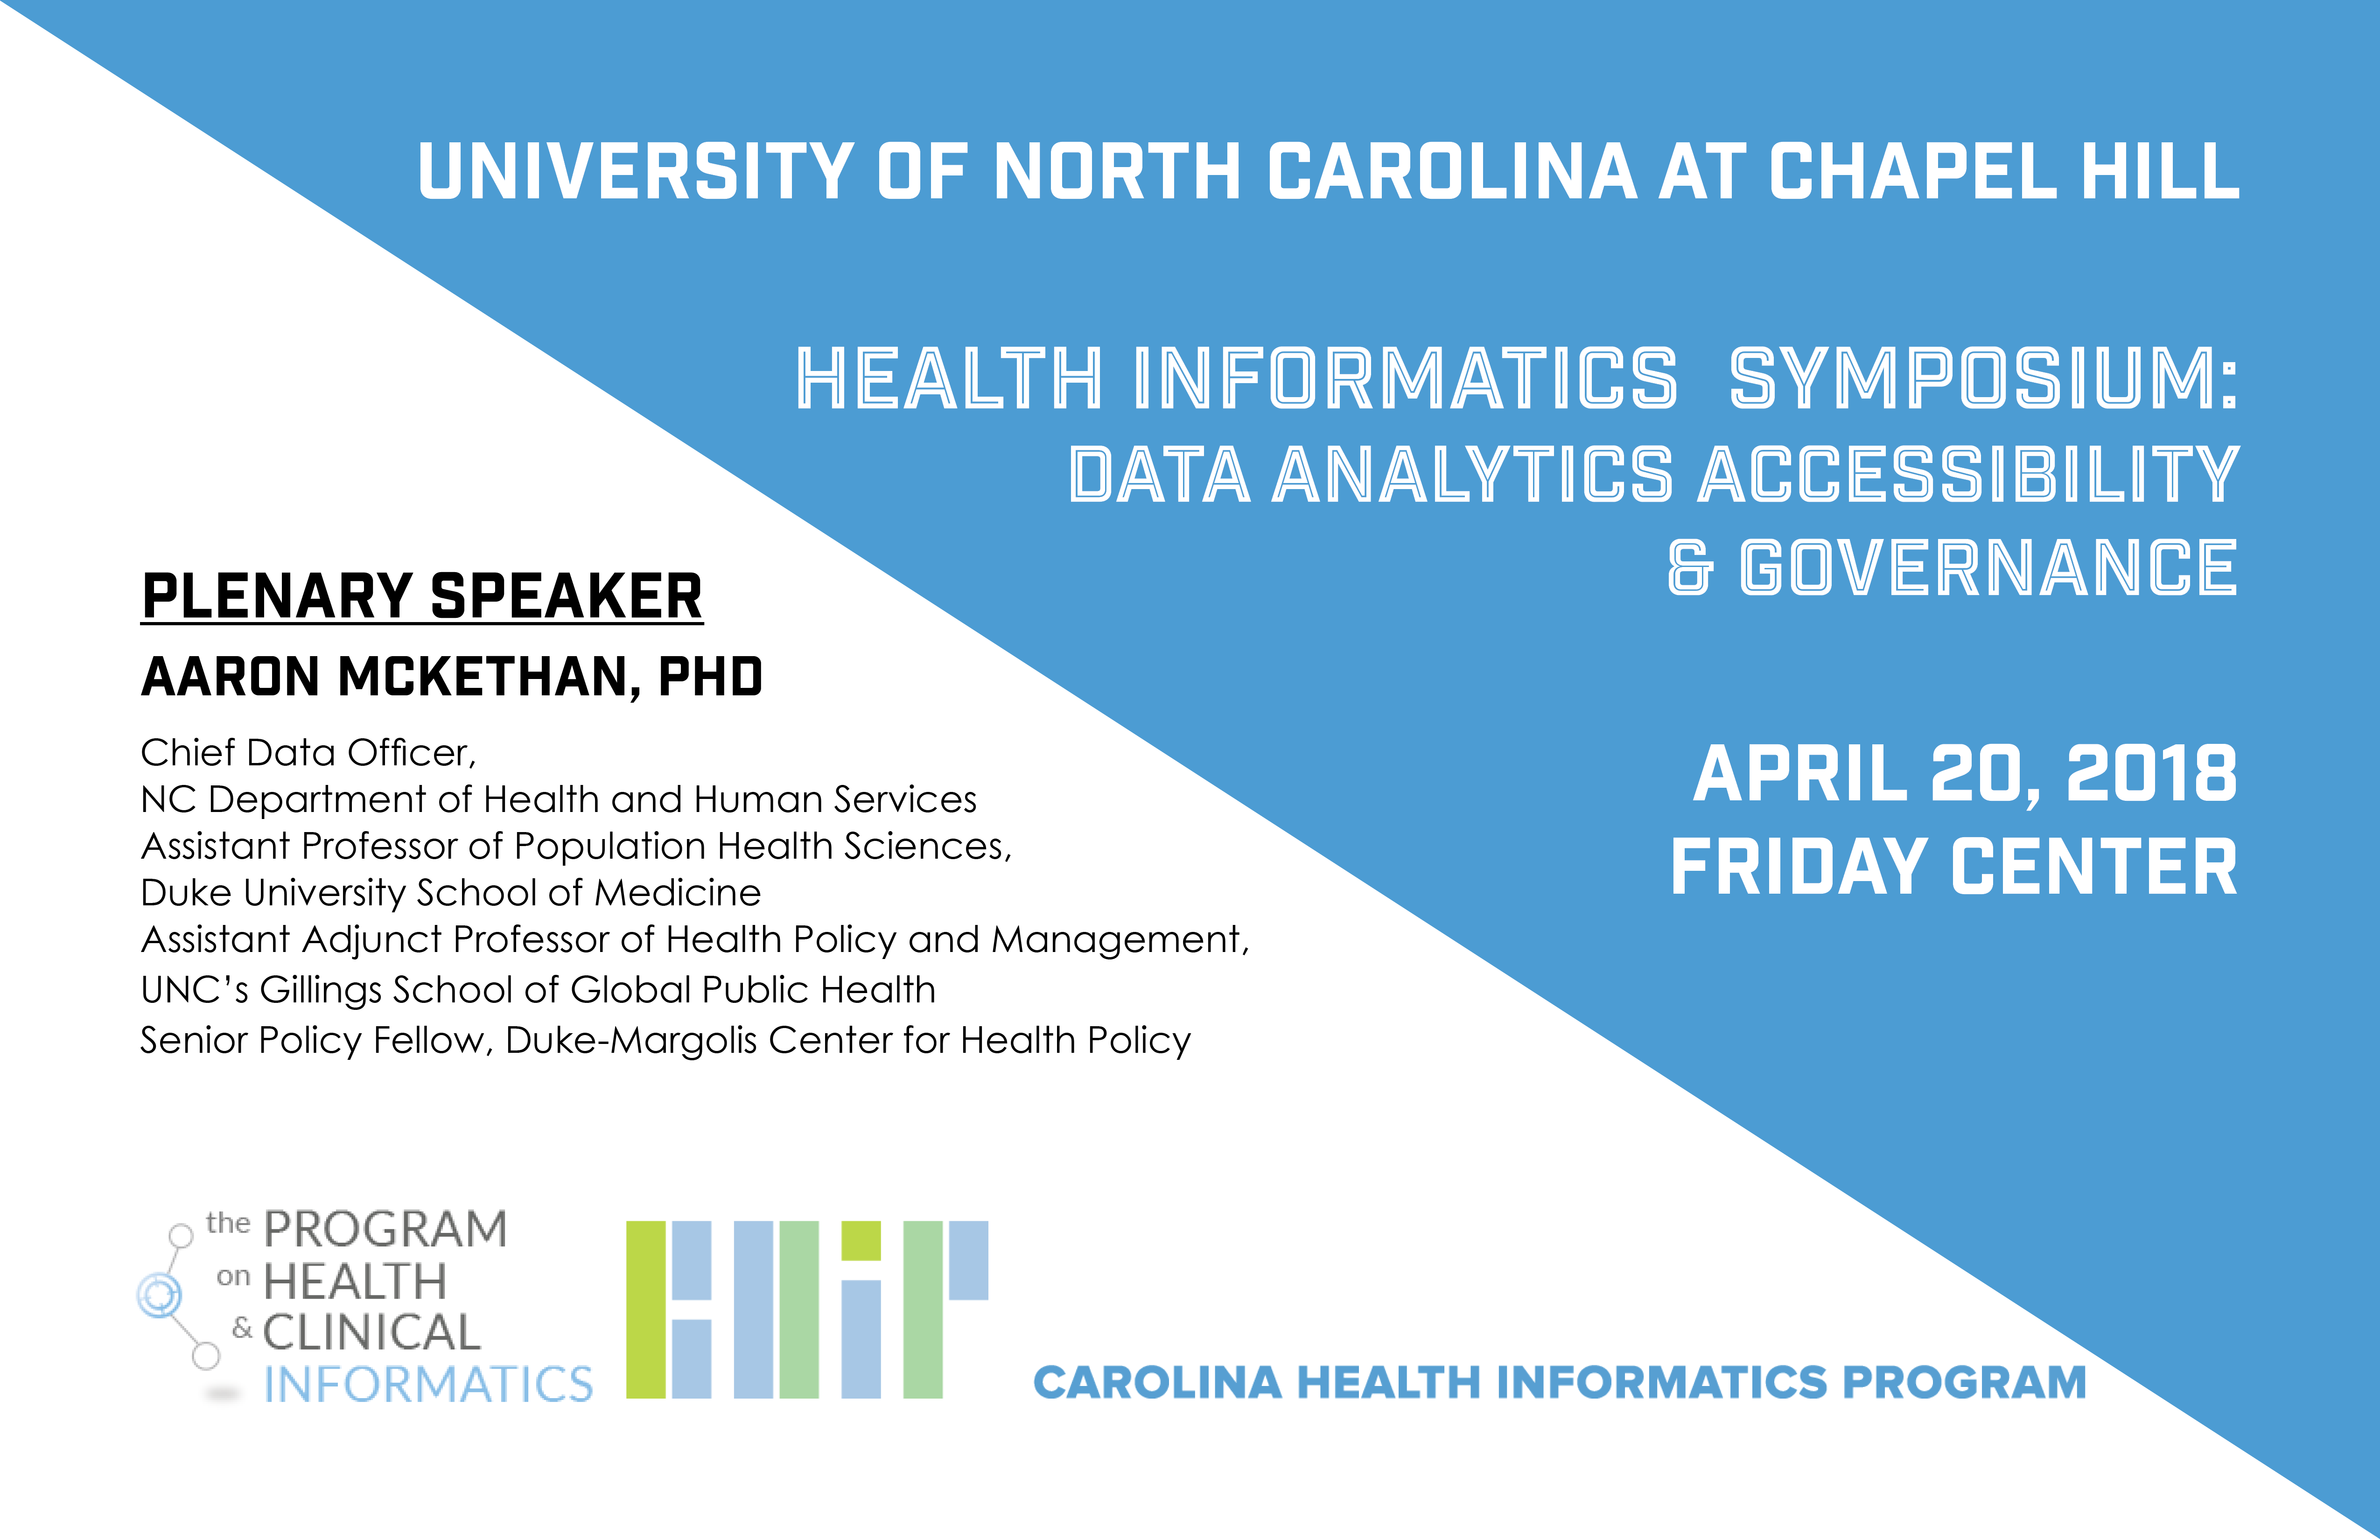 Flyer for the Health Informatics Symposium: Data Analytics Accessibility & Governance